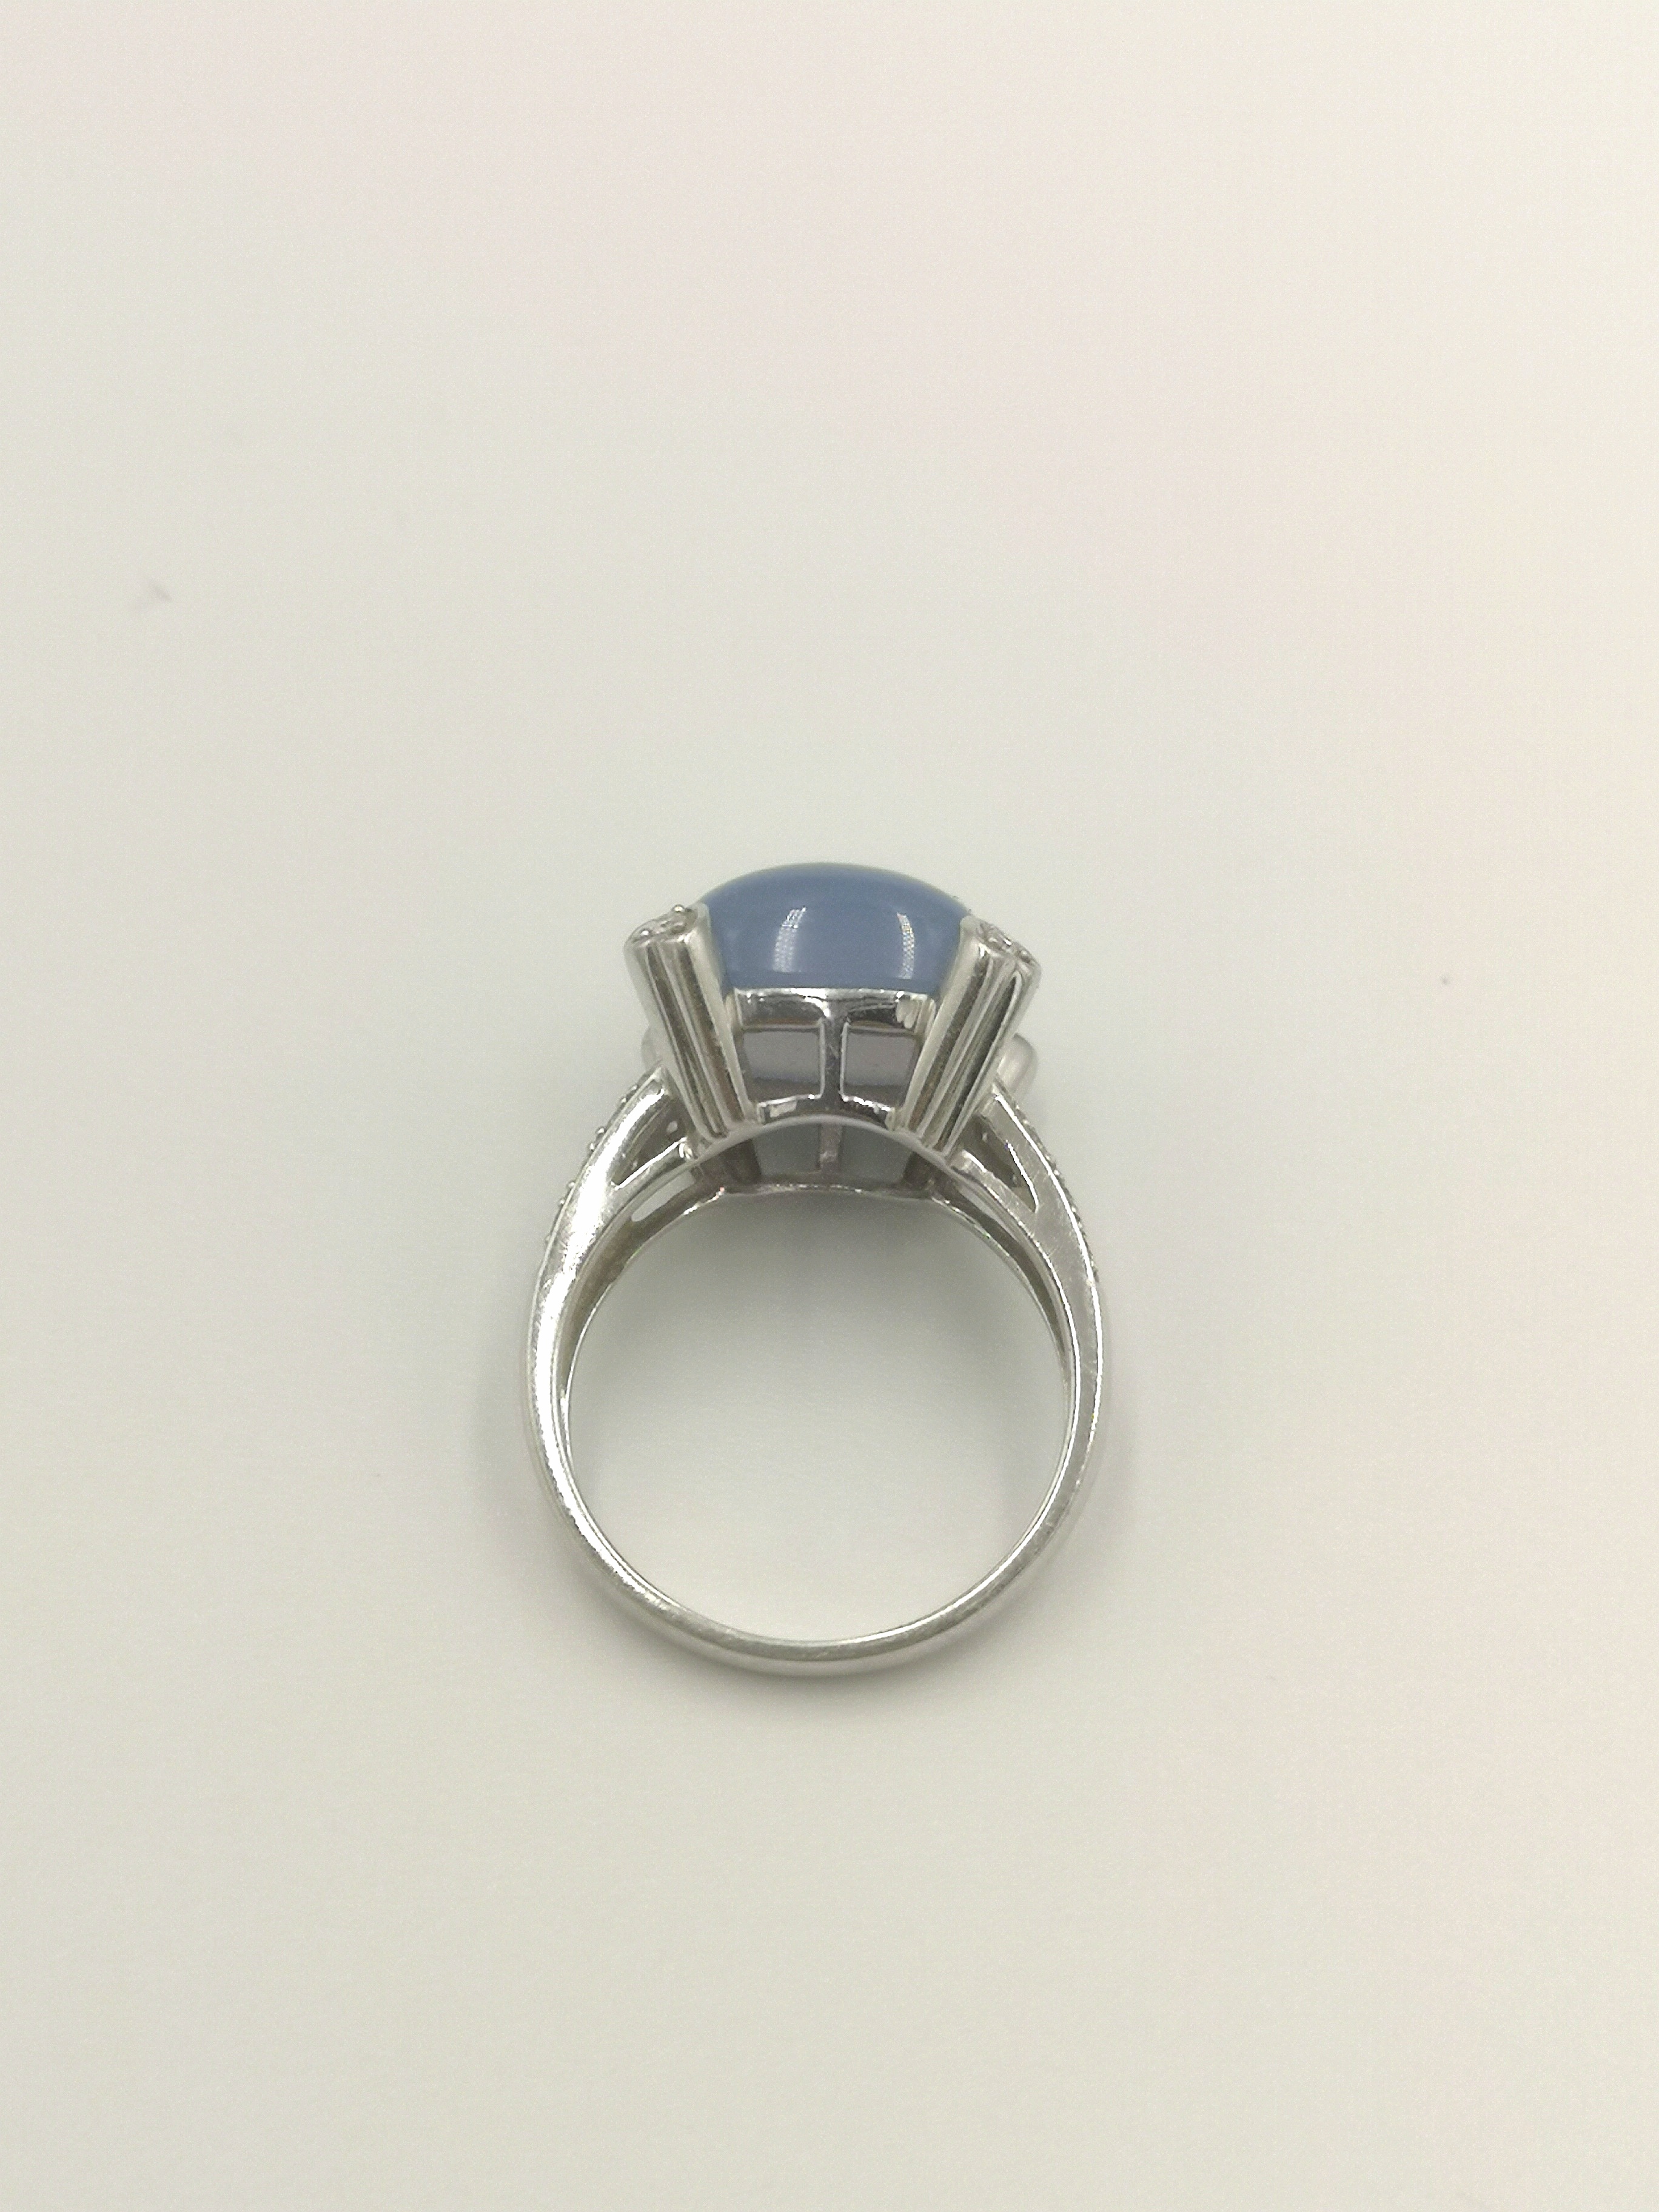 14ct gold and chalcedony ring - Image 5 of 6